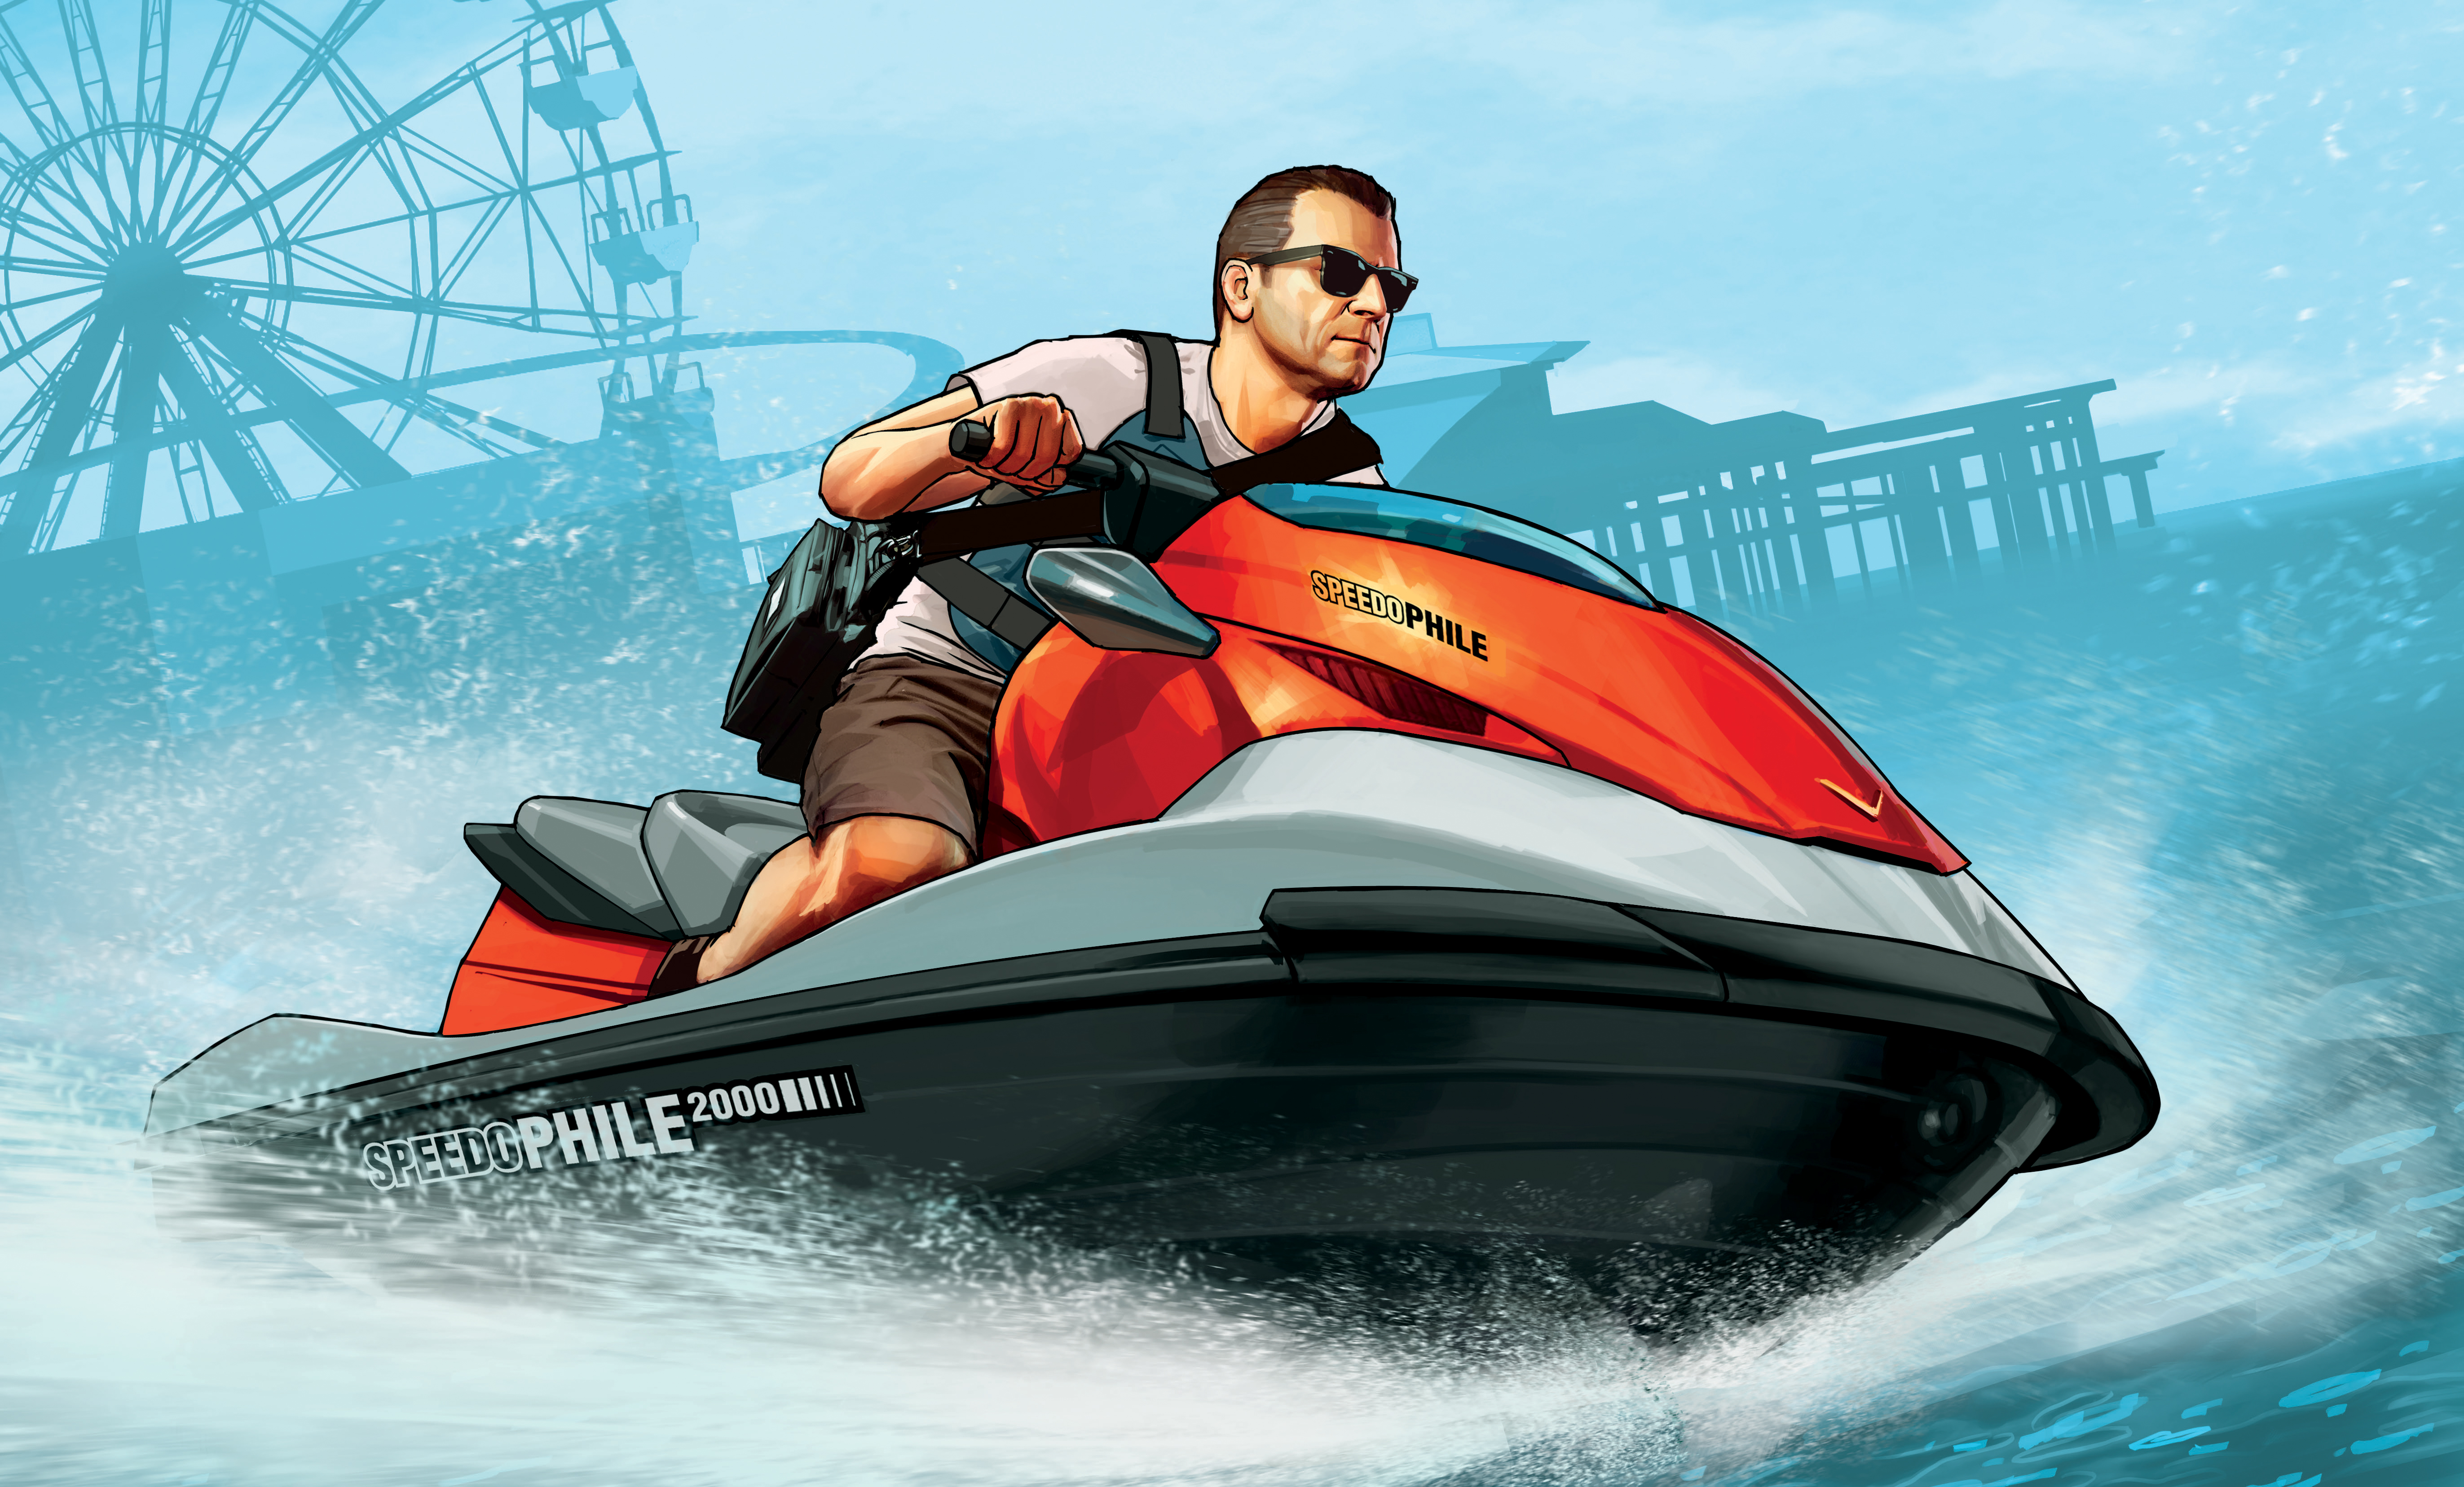 Michael Gta 5 4k, HD Games, 4k Wallpapers, Images, Backgrounds, Photos